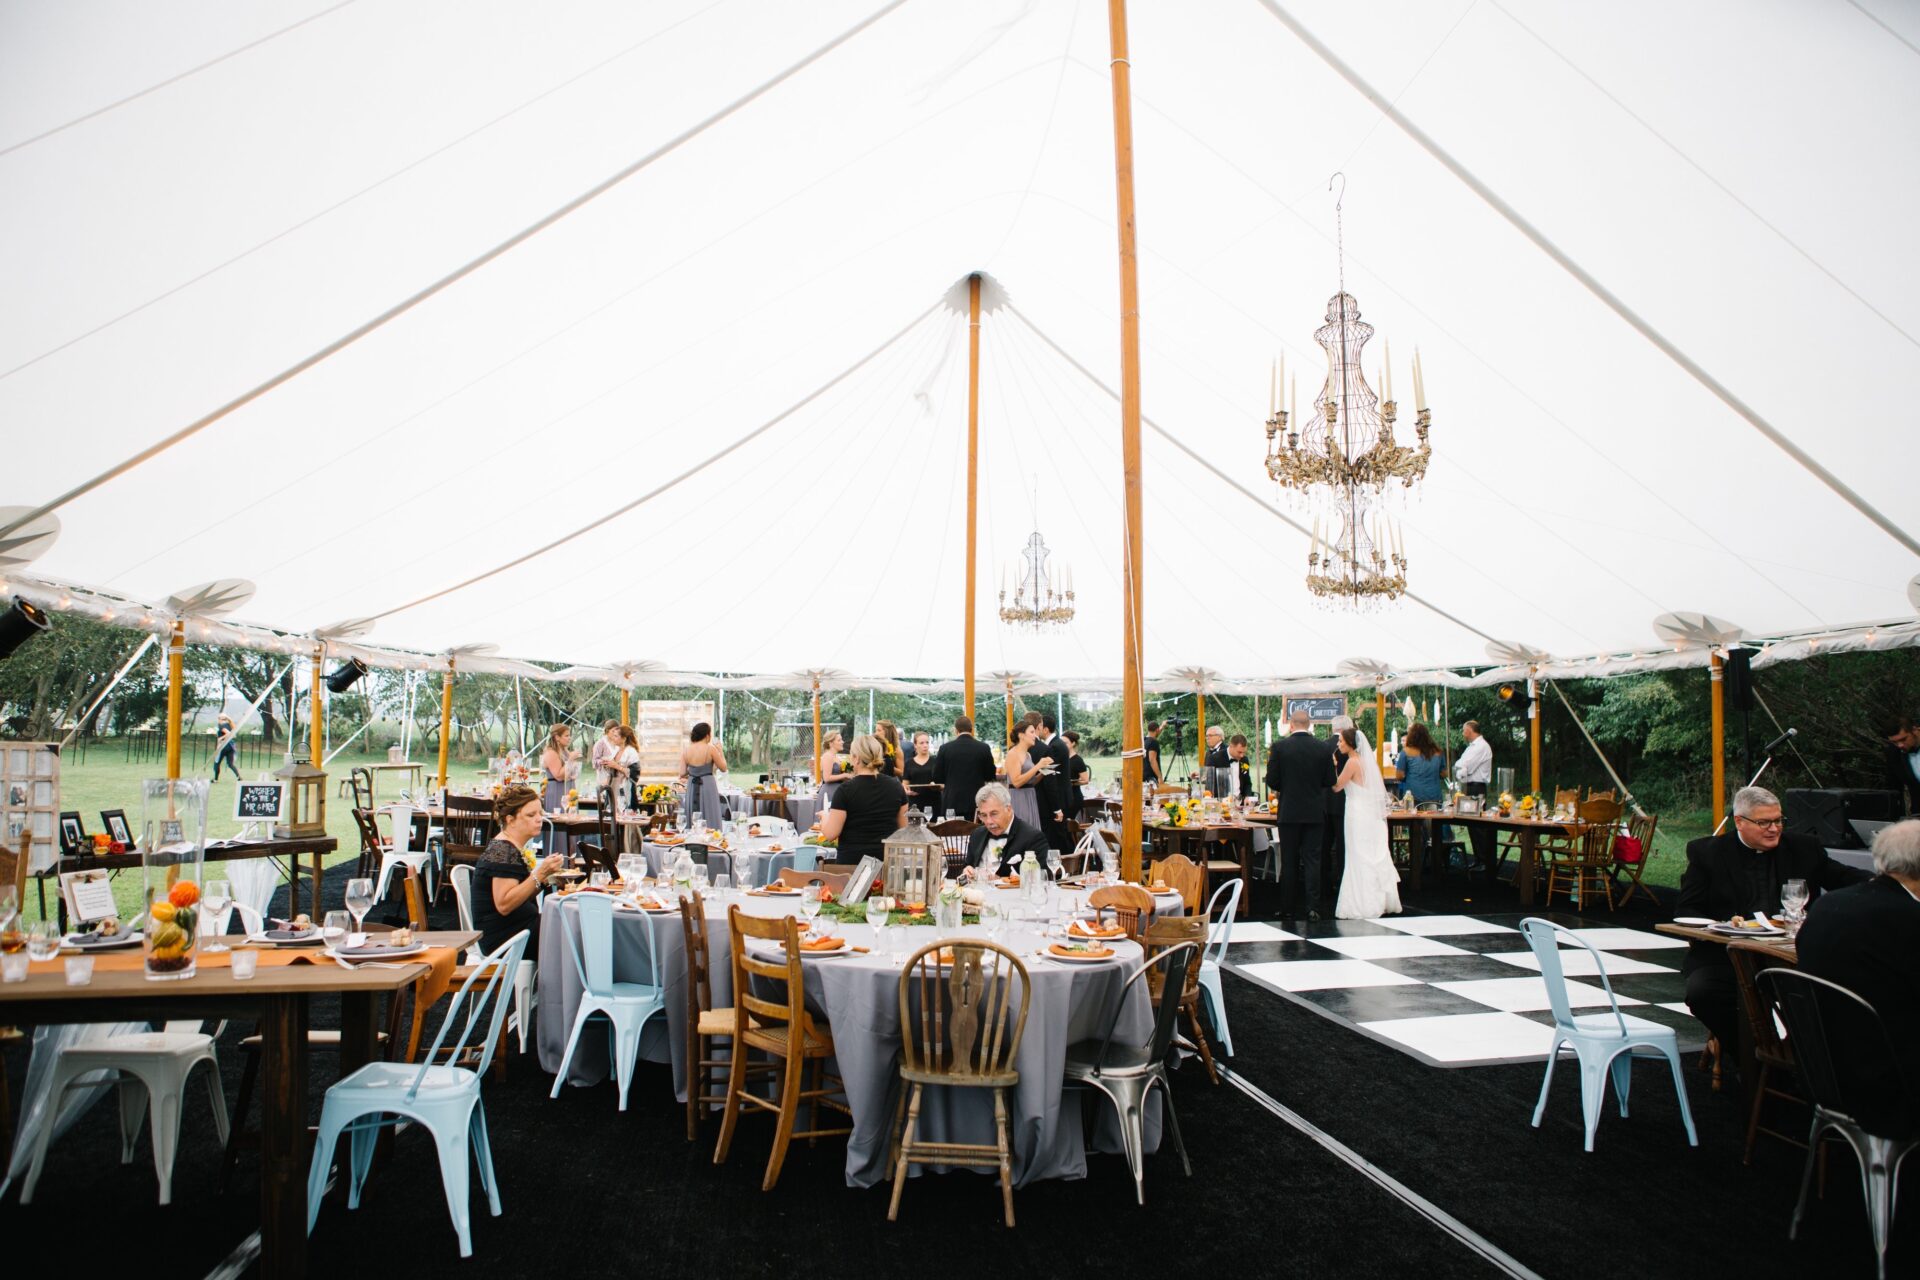 Wedding in tent with tables, guests